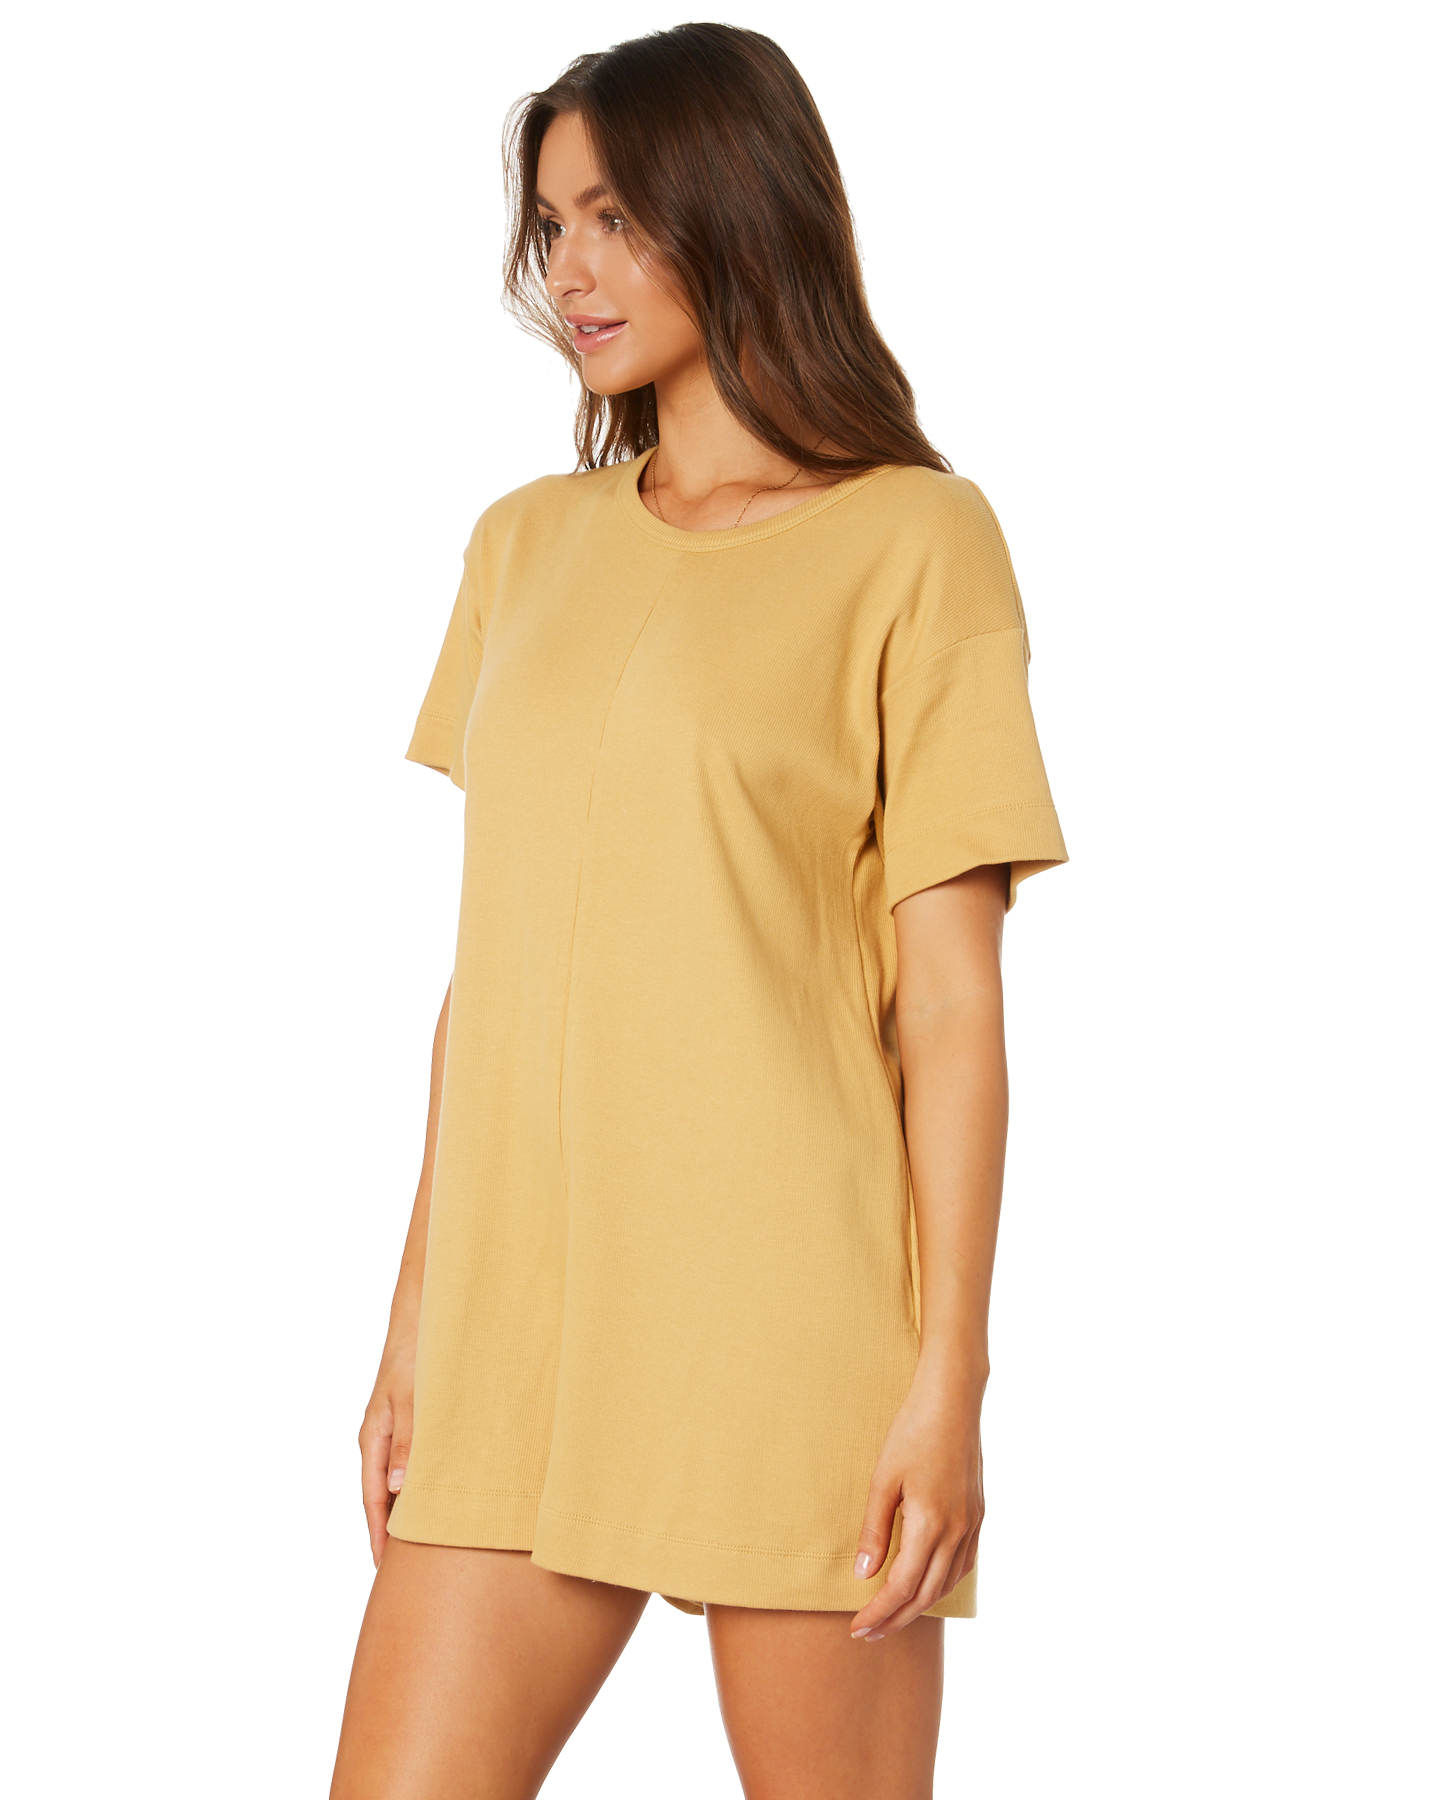 The Bare Road Bronte Playsuit - Mustard | SurfStitch